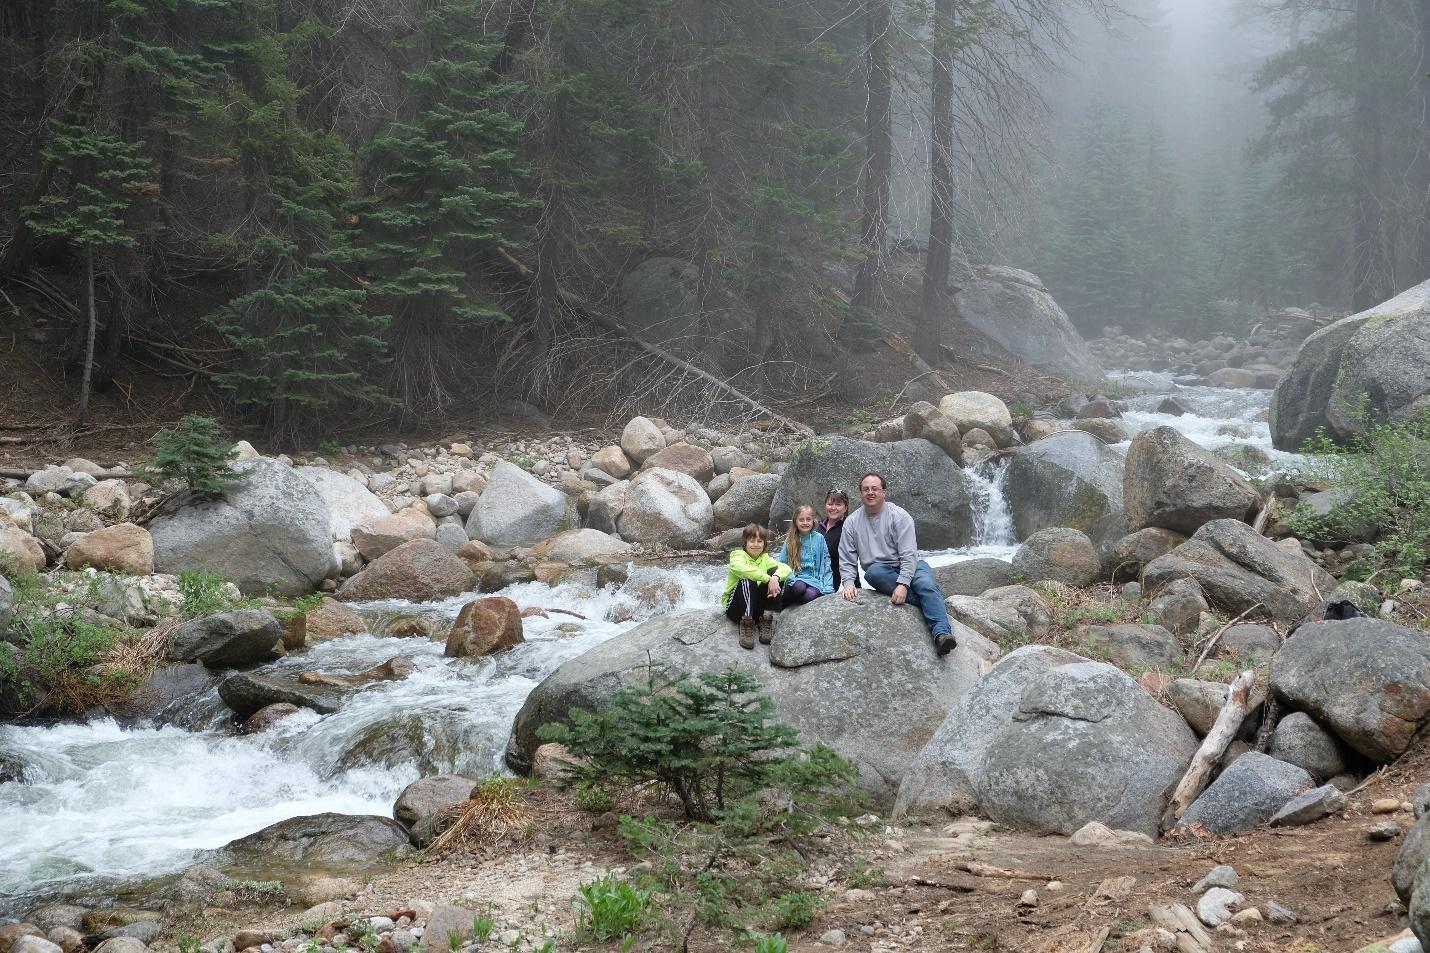 Top U.S. Family Travel Blog details what to do in Northern California with kids!